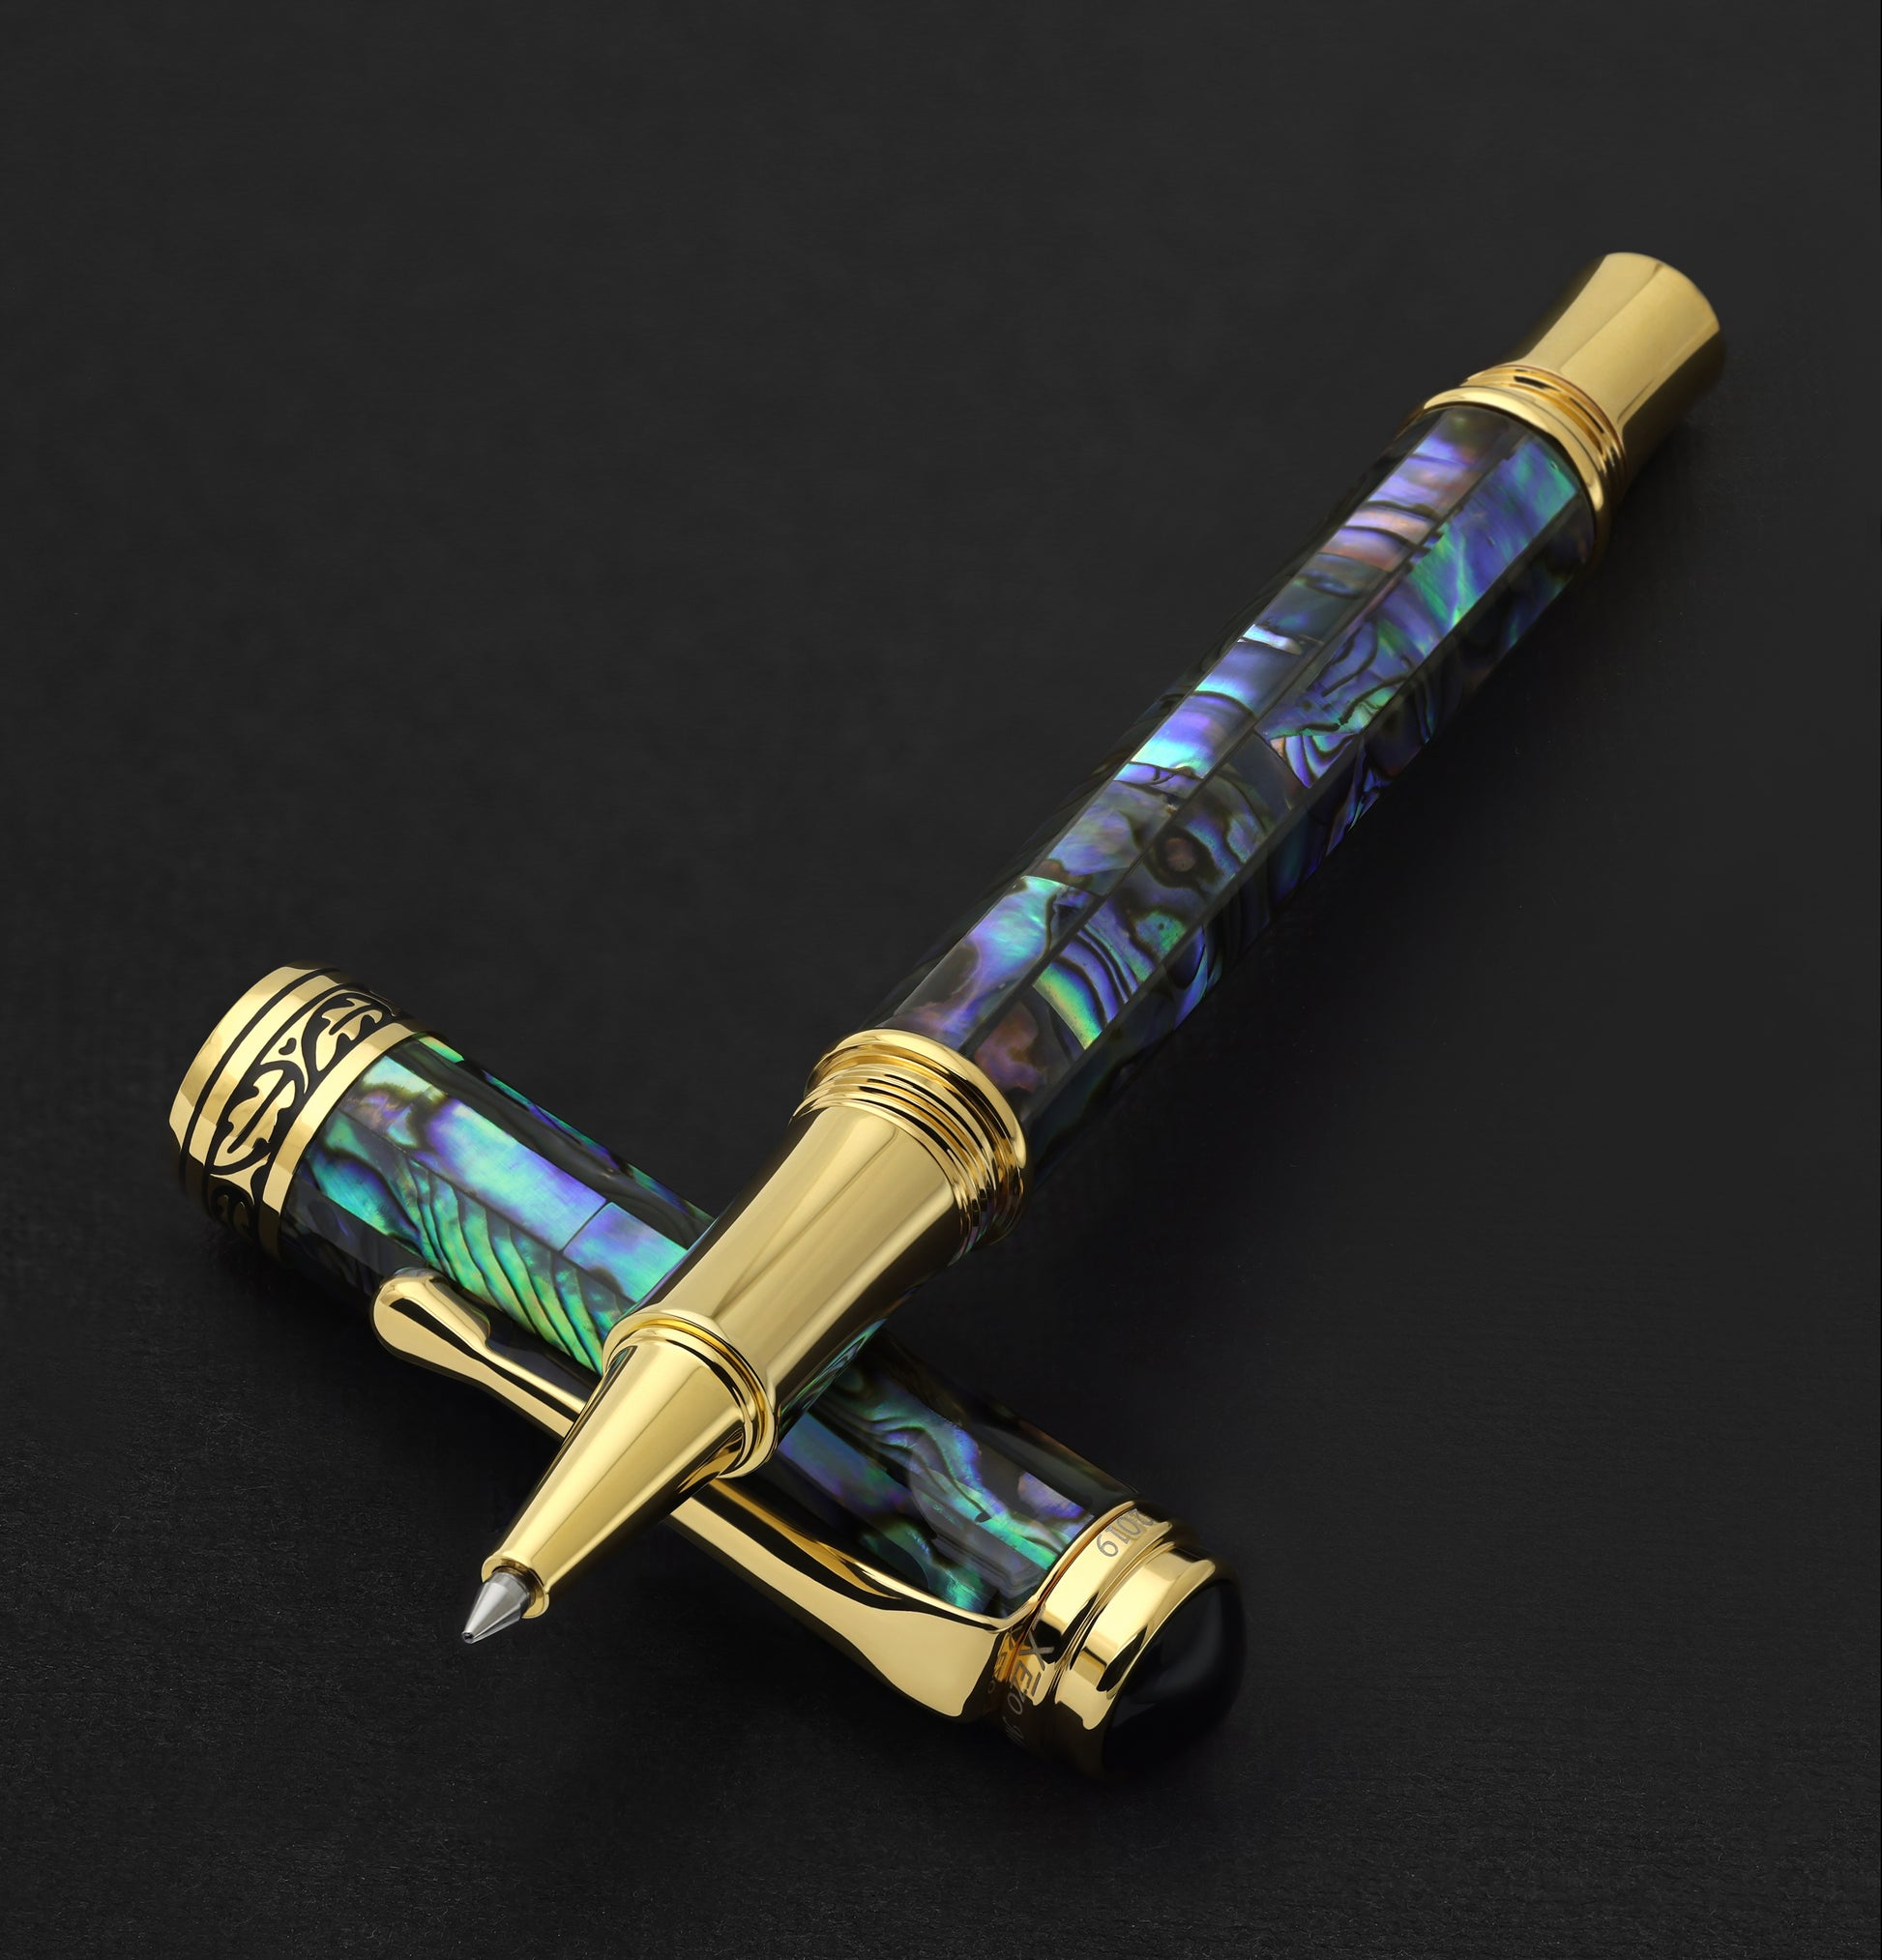 Xezo - Maestro Sea Shell RPG-1A Rollerball pen resting on its cap